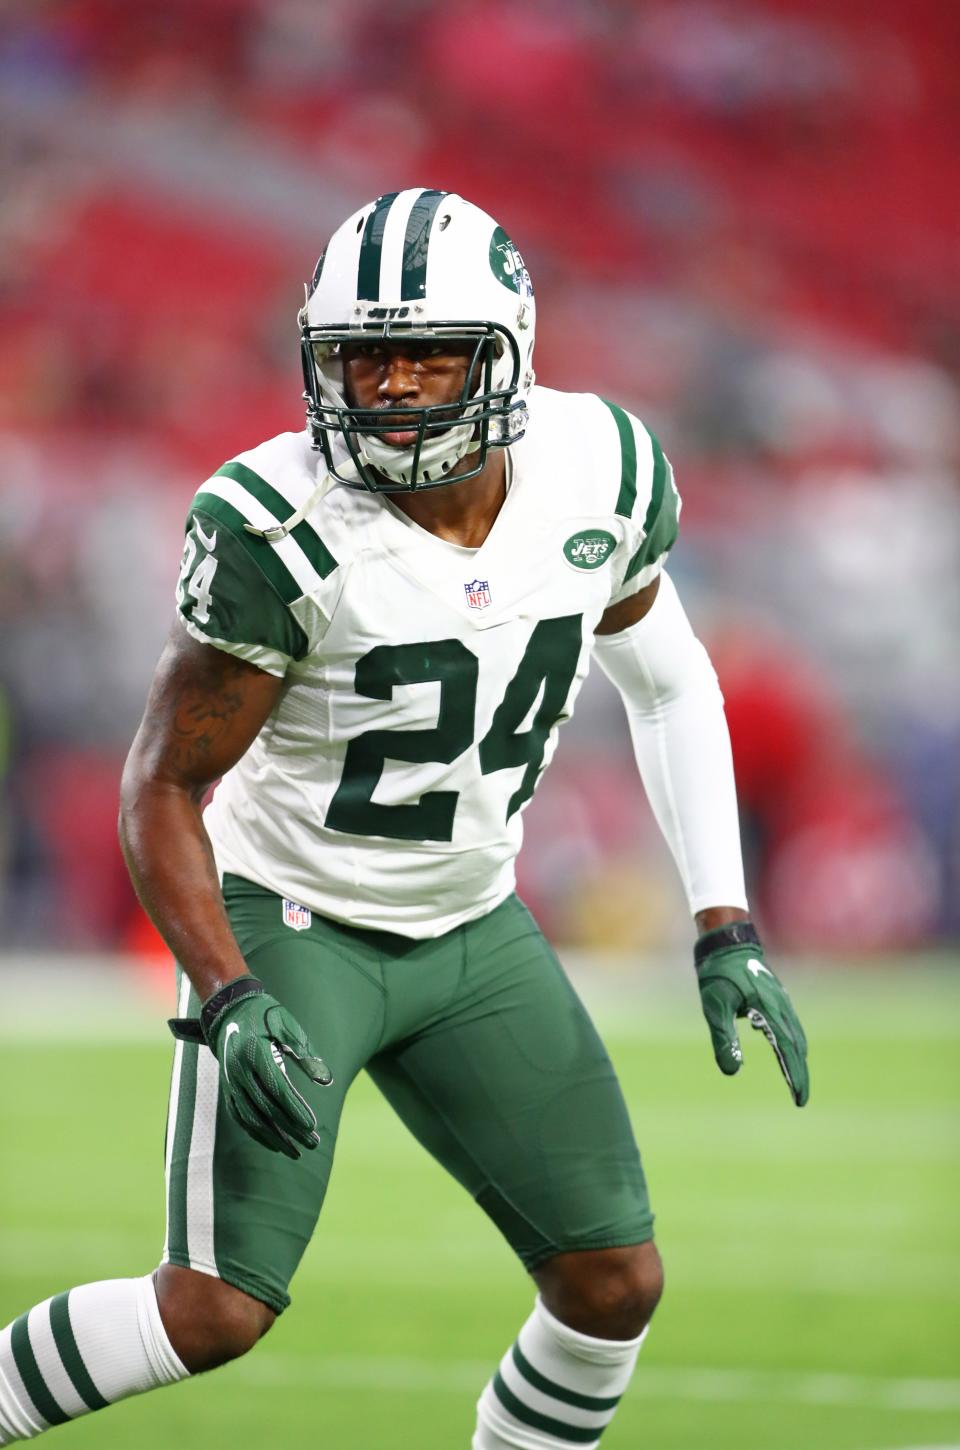 Cornerback Darrelle Revis finished his career with 32 interceptions when including the playoffs.